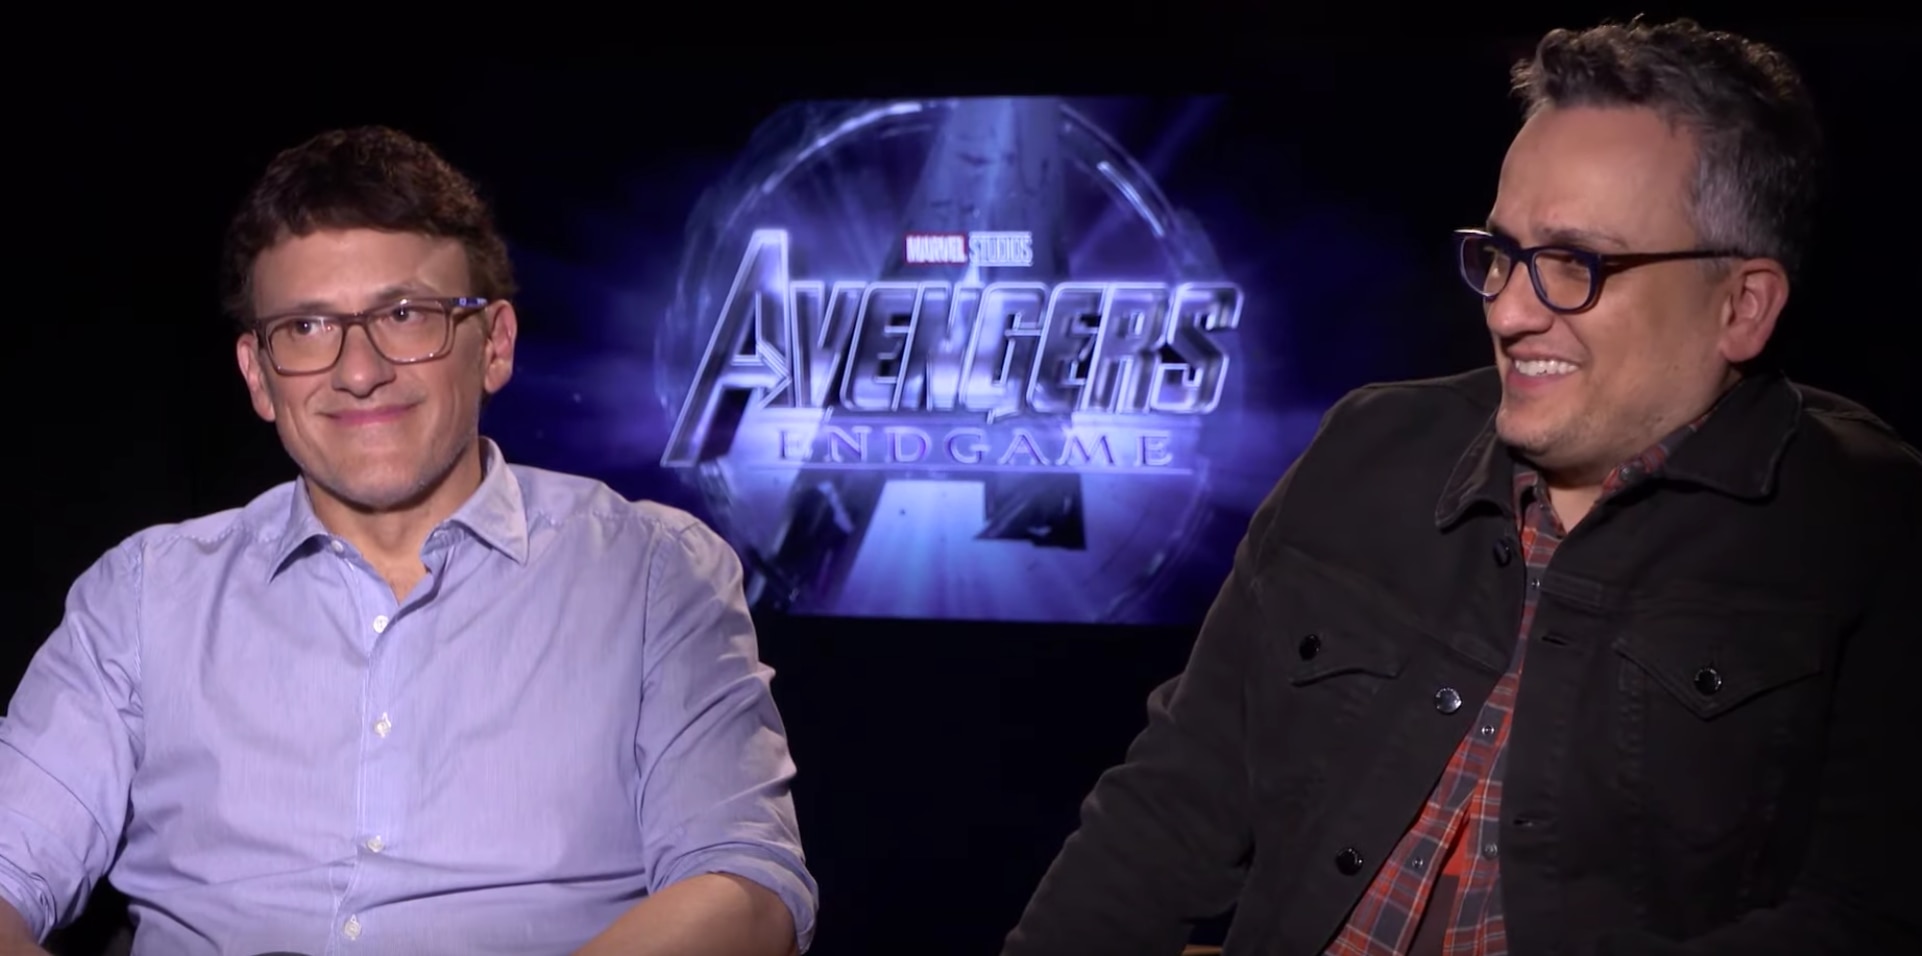 Russo Brothers interview for Avengers: Endgame junket